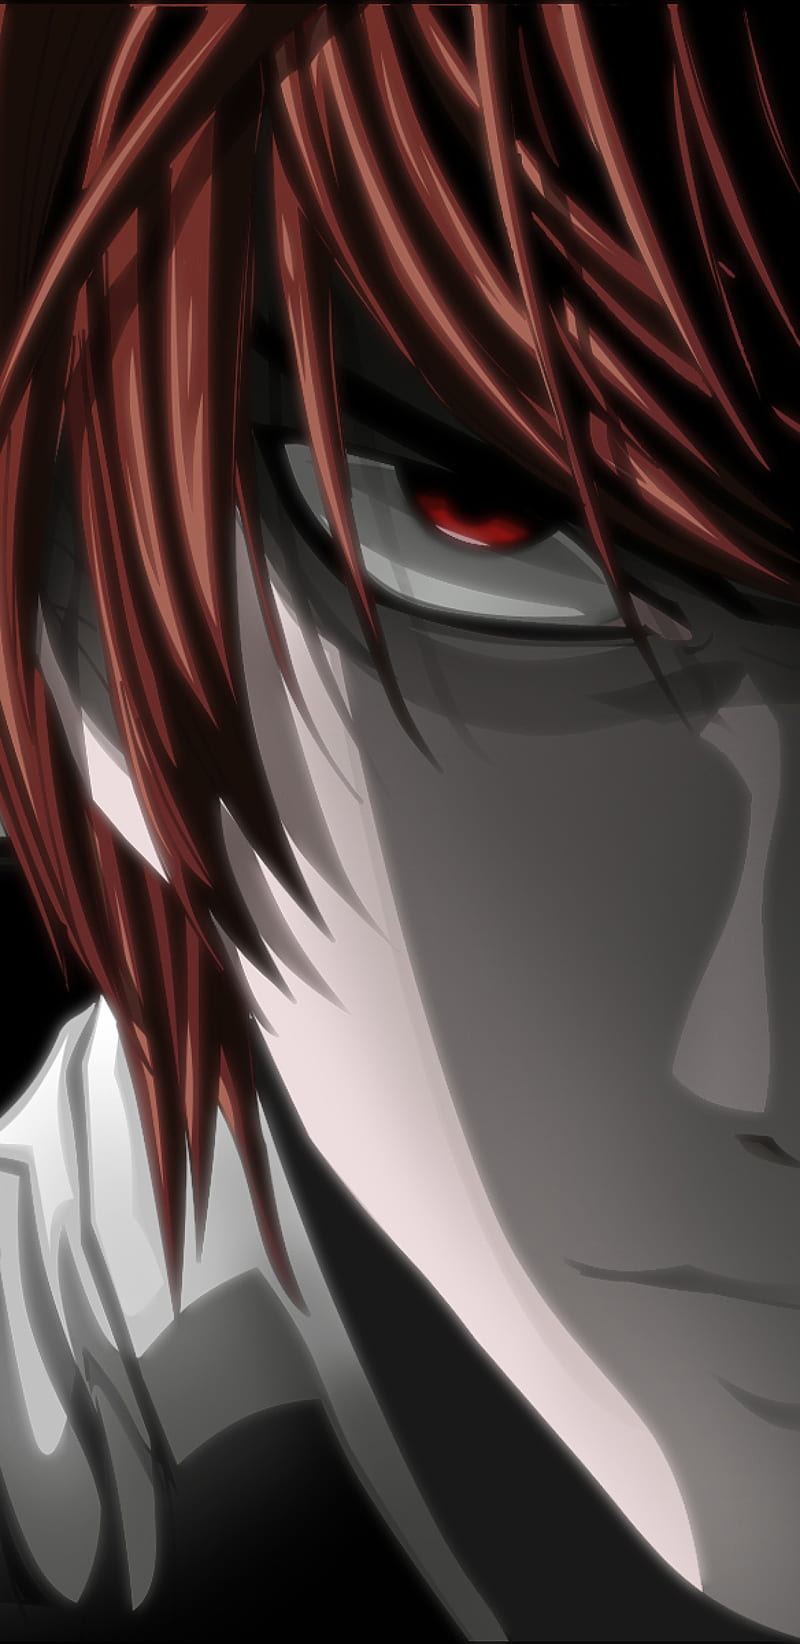 Wallpaper ID 439356  Anime Death Note Phone Wallpaper Light Yagami  750x1334 free download